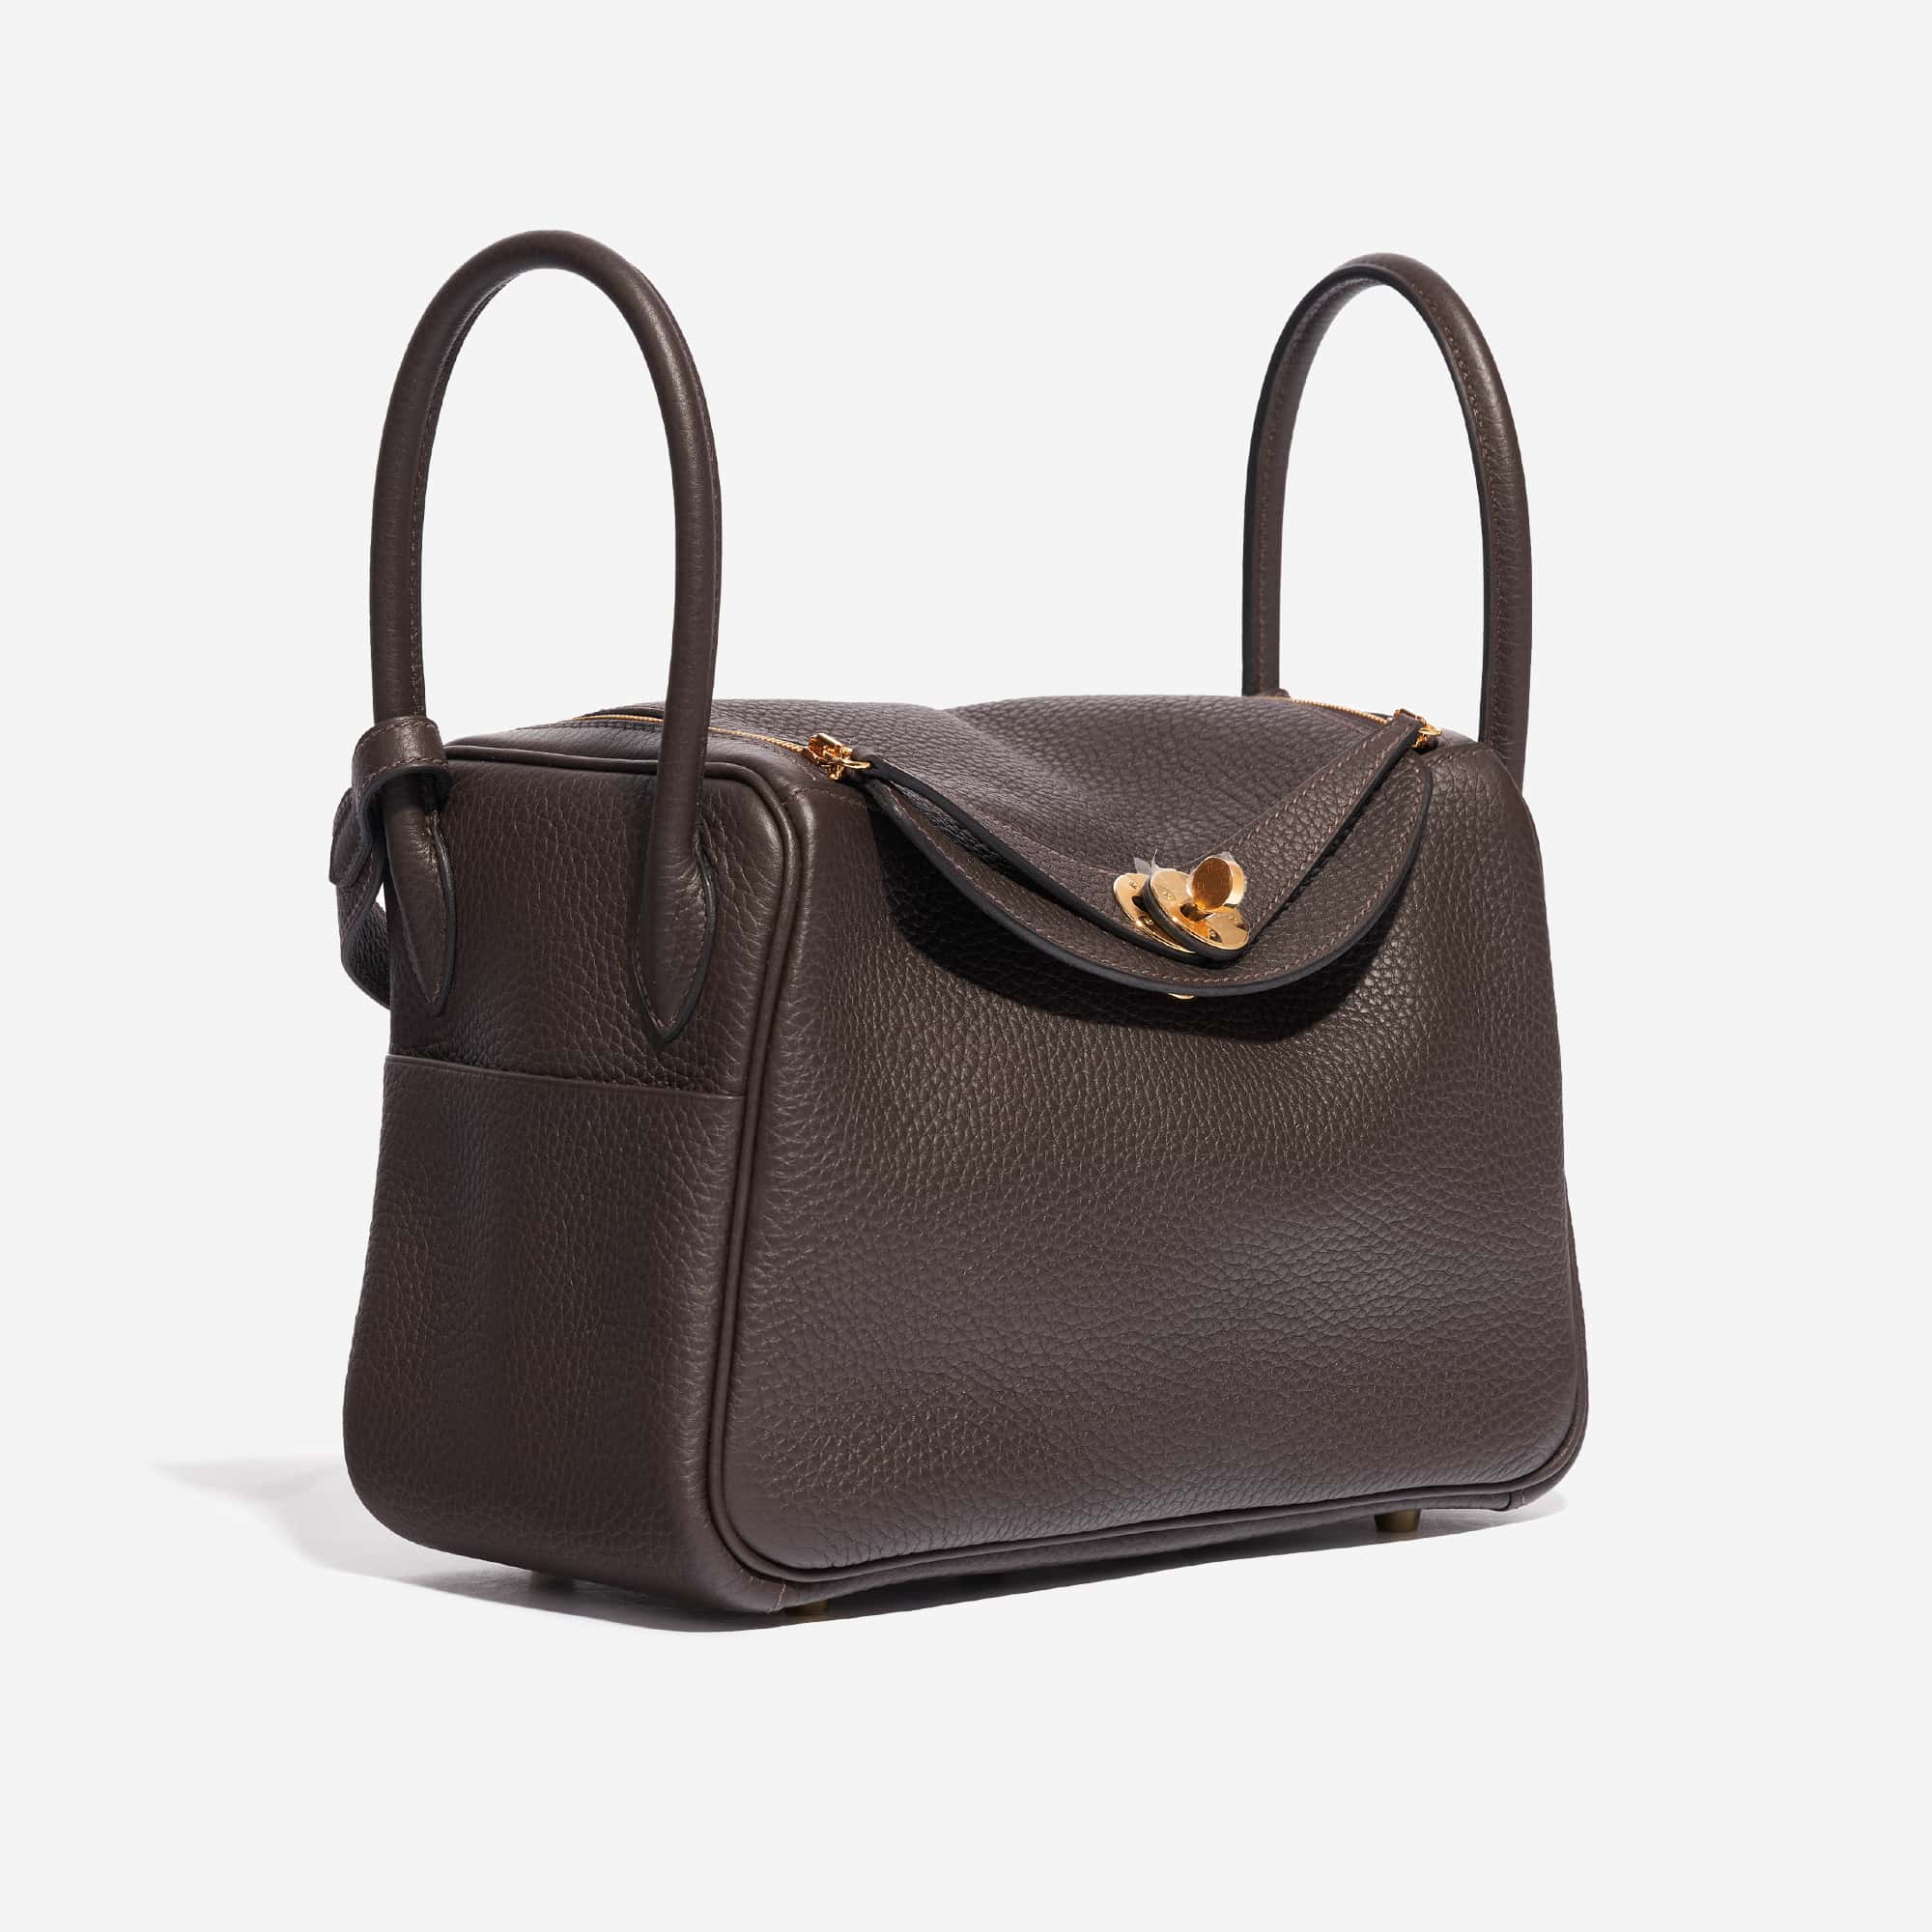 An Hermes Unsung Hero! HERMES LINDY 26 REVIEW - How I'm liking the